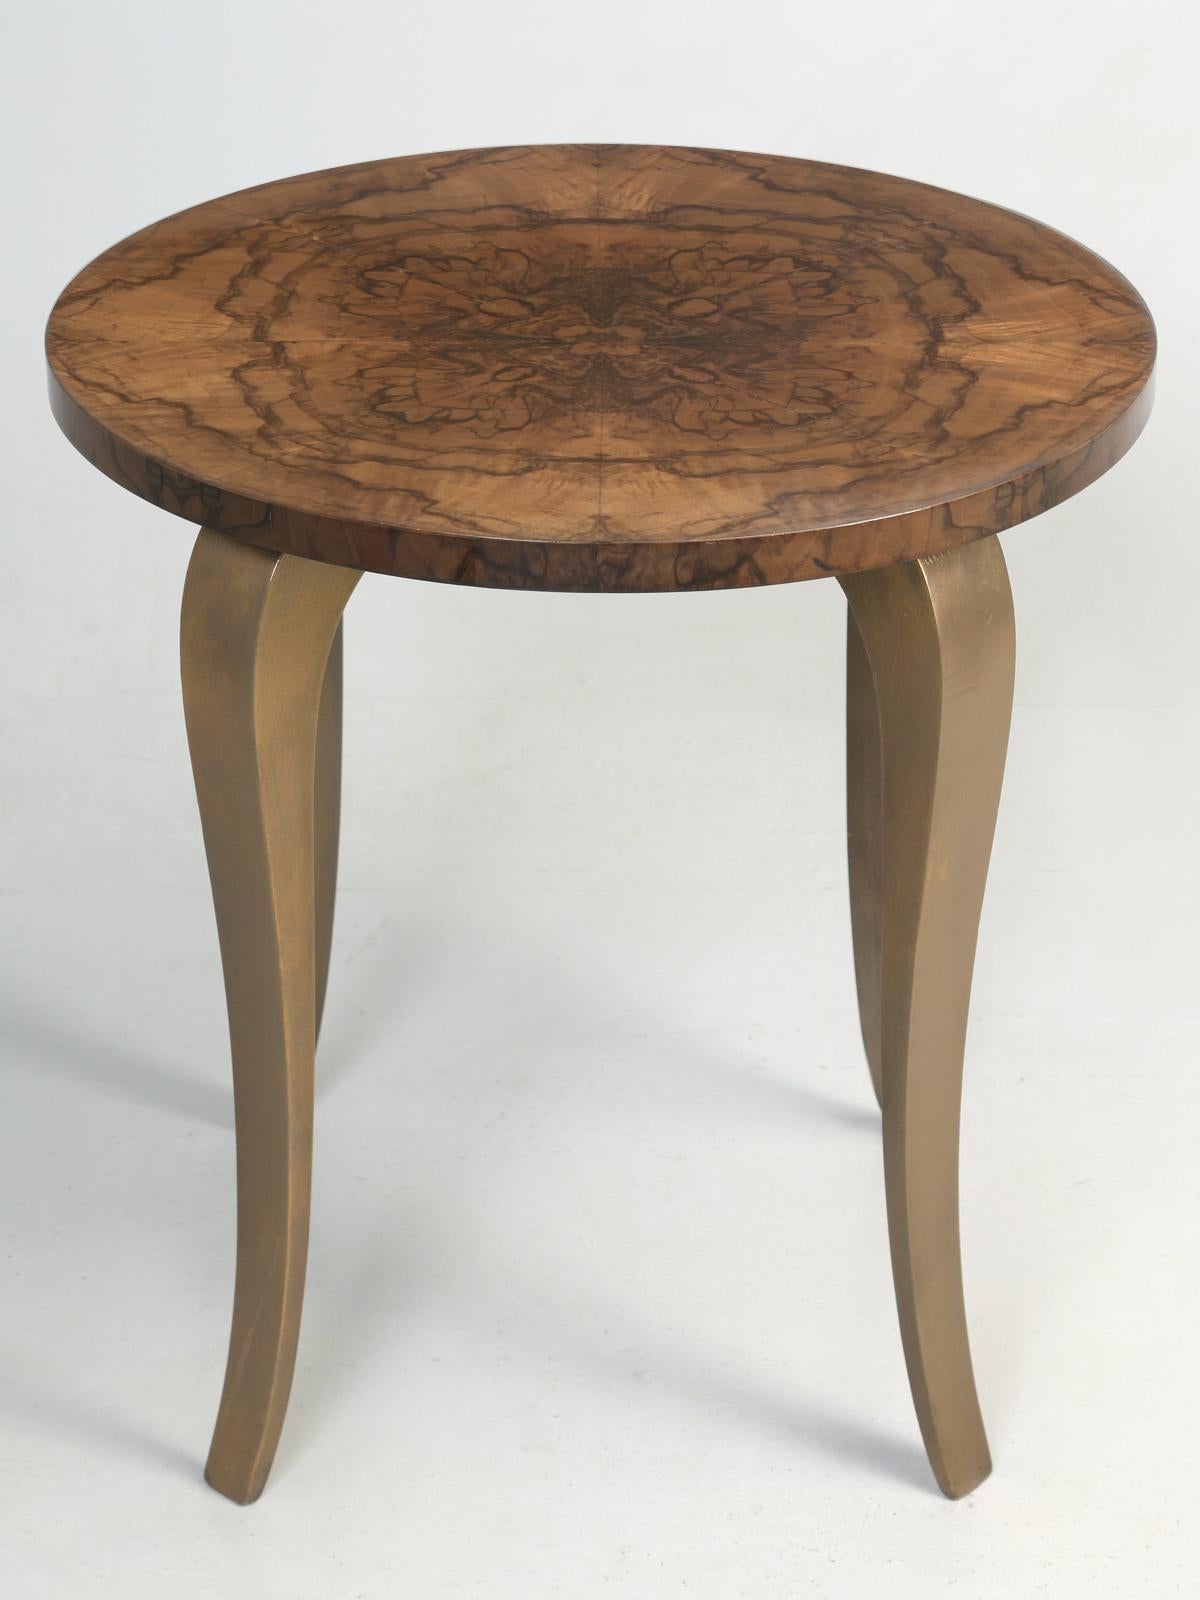 French circa 1930s-1940s, burl walnut end table, or side table if you prefer. During the restoration process, we French polished the burl walnut top, to a high gloss finish, in order to bring out, the incredible grain of the walnut end tabletop and